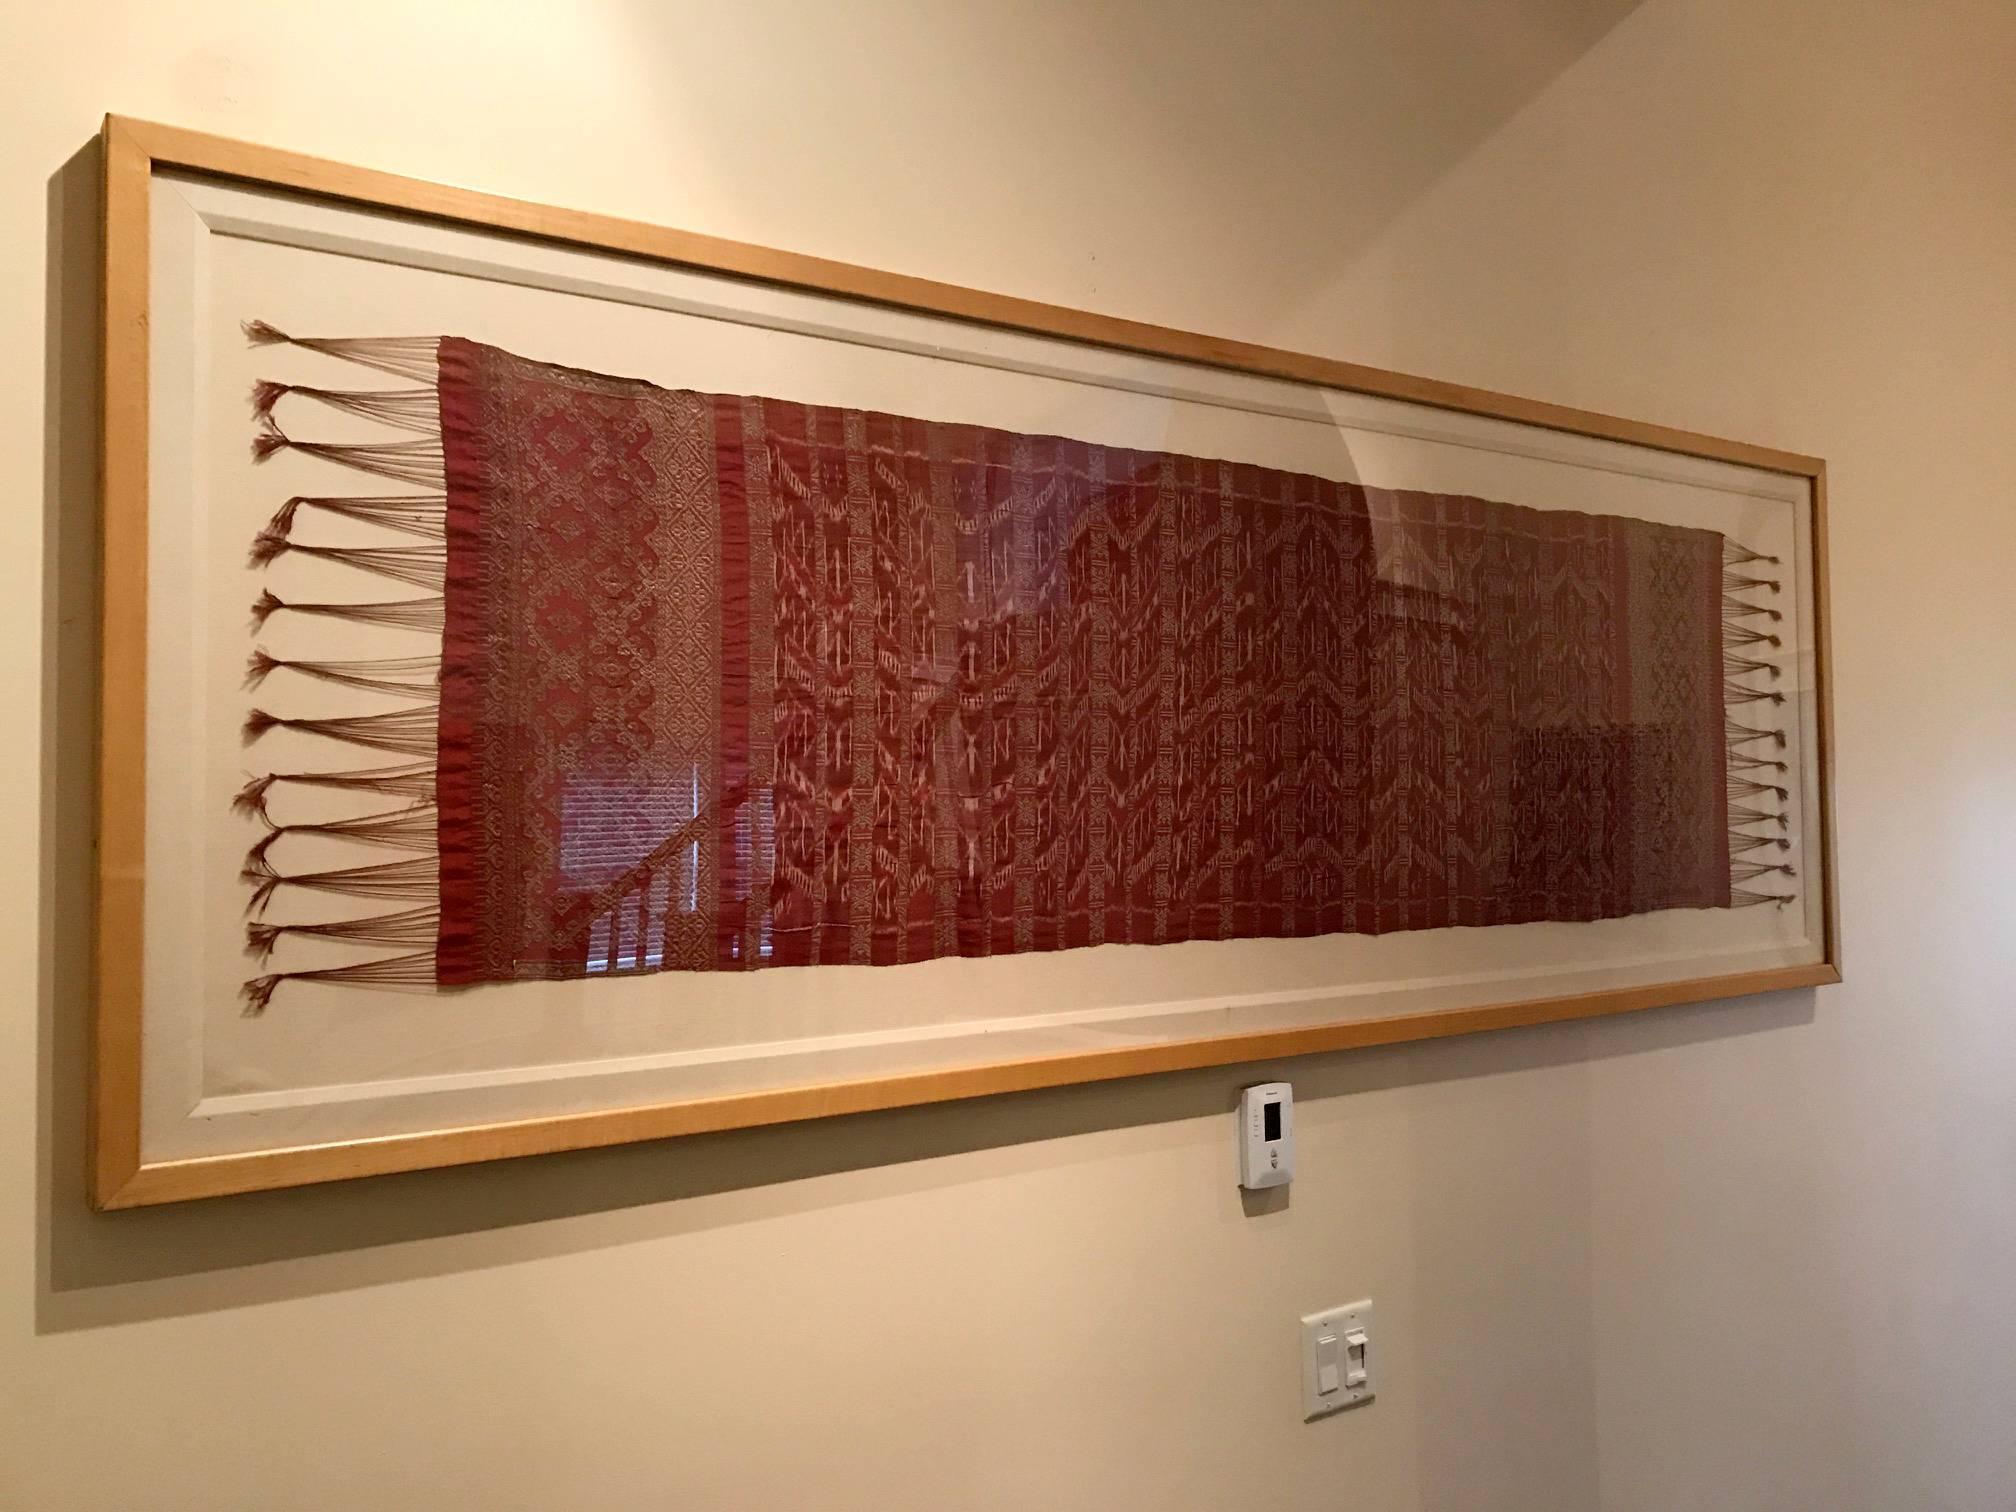 A beautifully woven silk Ikat with fringes on both end, collected from Jingaraia Region on Bali island of Indonesia, circa early 20th century or earlier. The textile features red, silver and blue colored zigzag patterns with silver diamond bands on